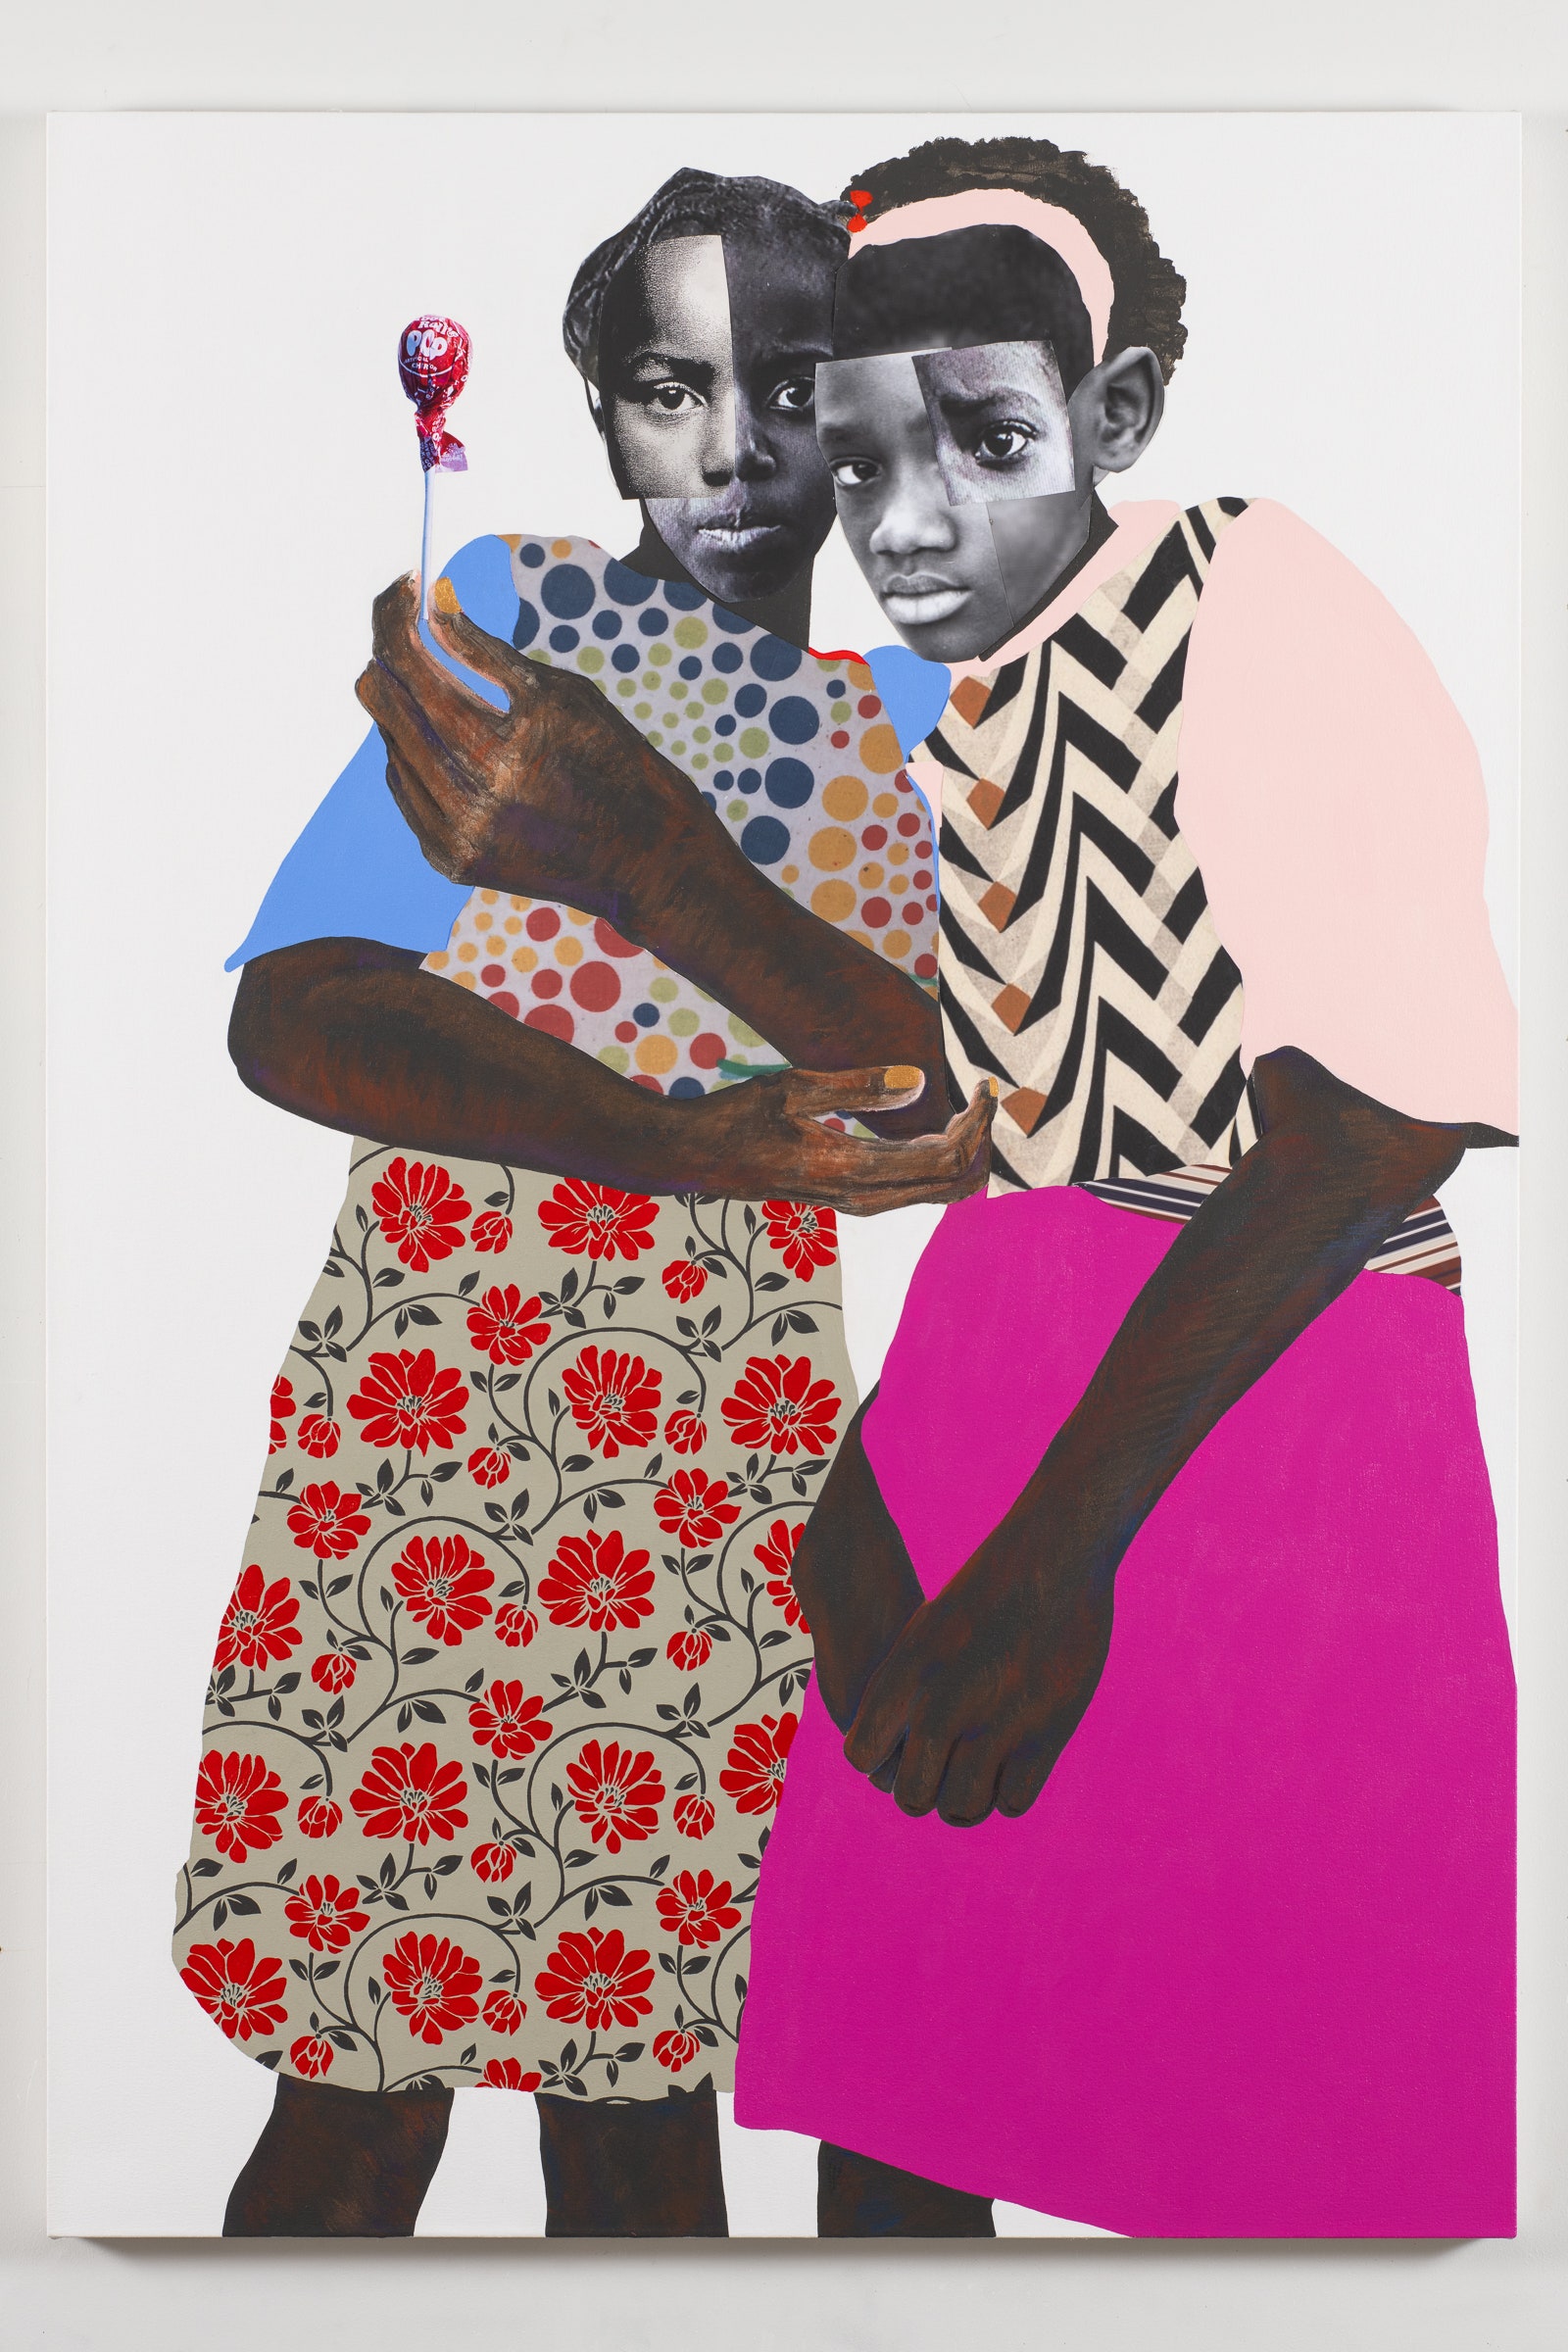 A collage/painting hybrid featuring two black-and-white photos of the faces of two young girls made from multiple pictures and arranged atop colorful painted bodies. They wear flower and geometric patterned blouses and skirts. One holds up a lollipop. Their demeanor is serious and confident.